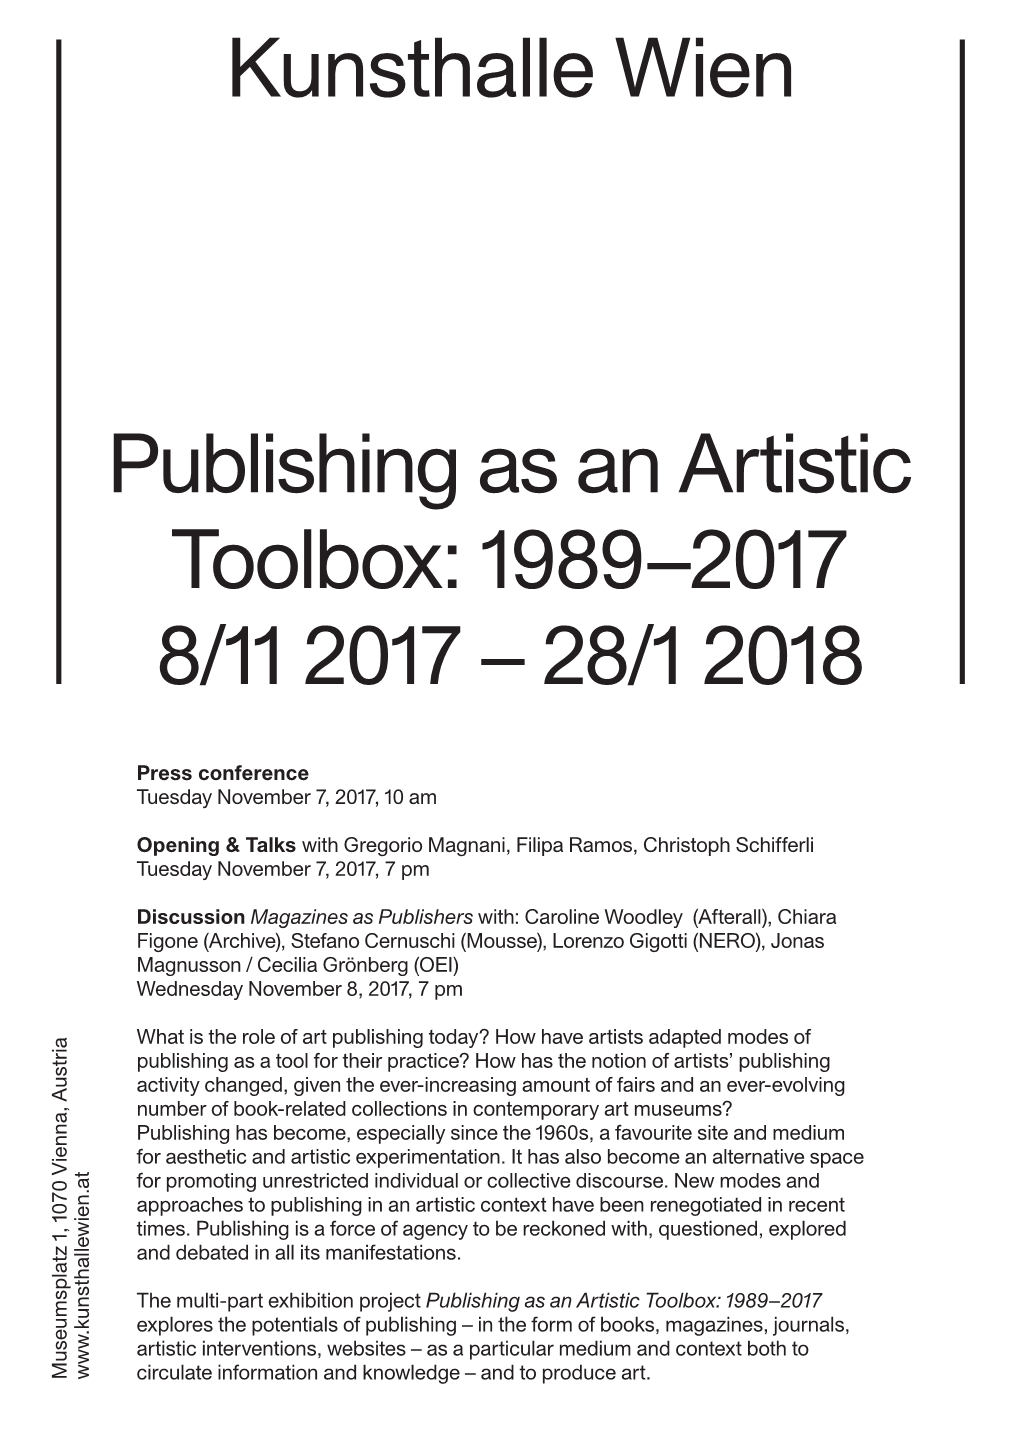 Kunsthalle Wien Publishing As an Artistic Toolbox